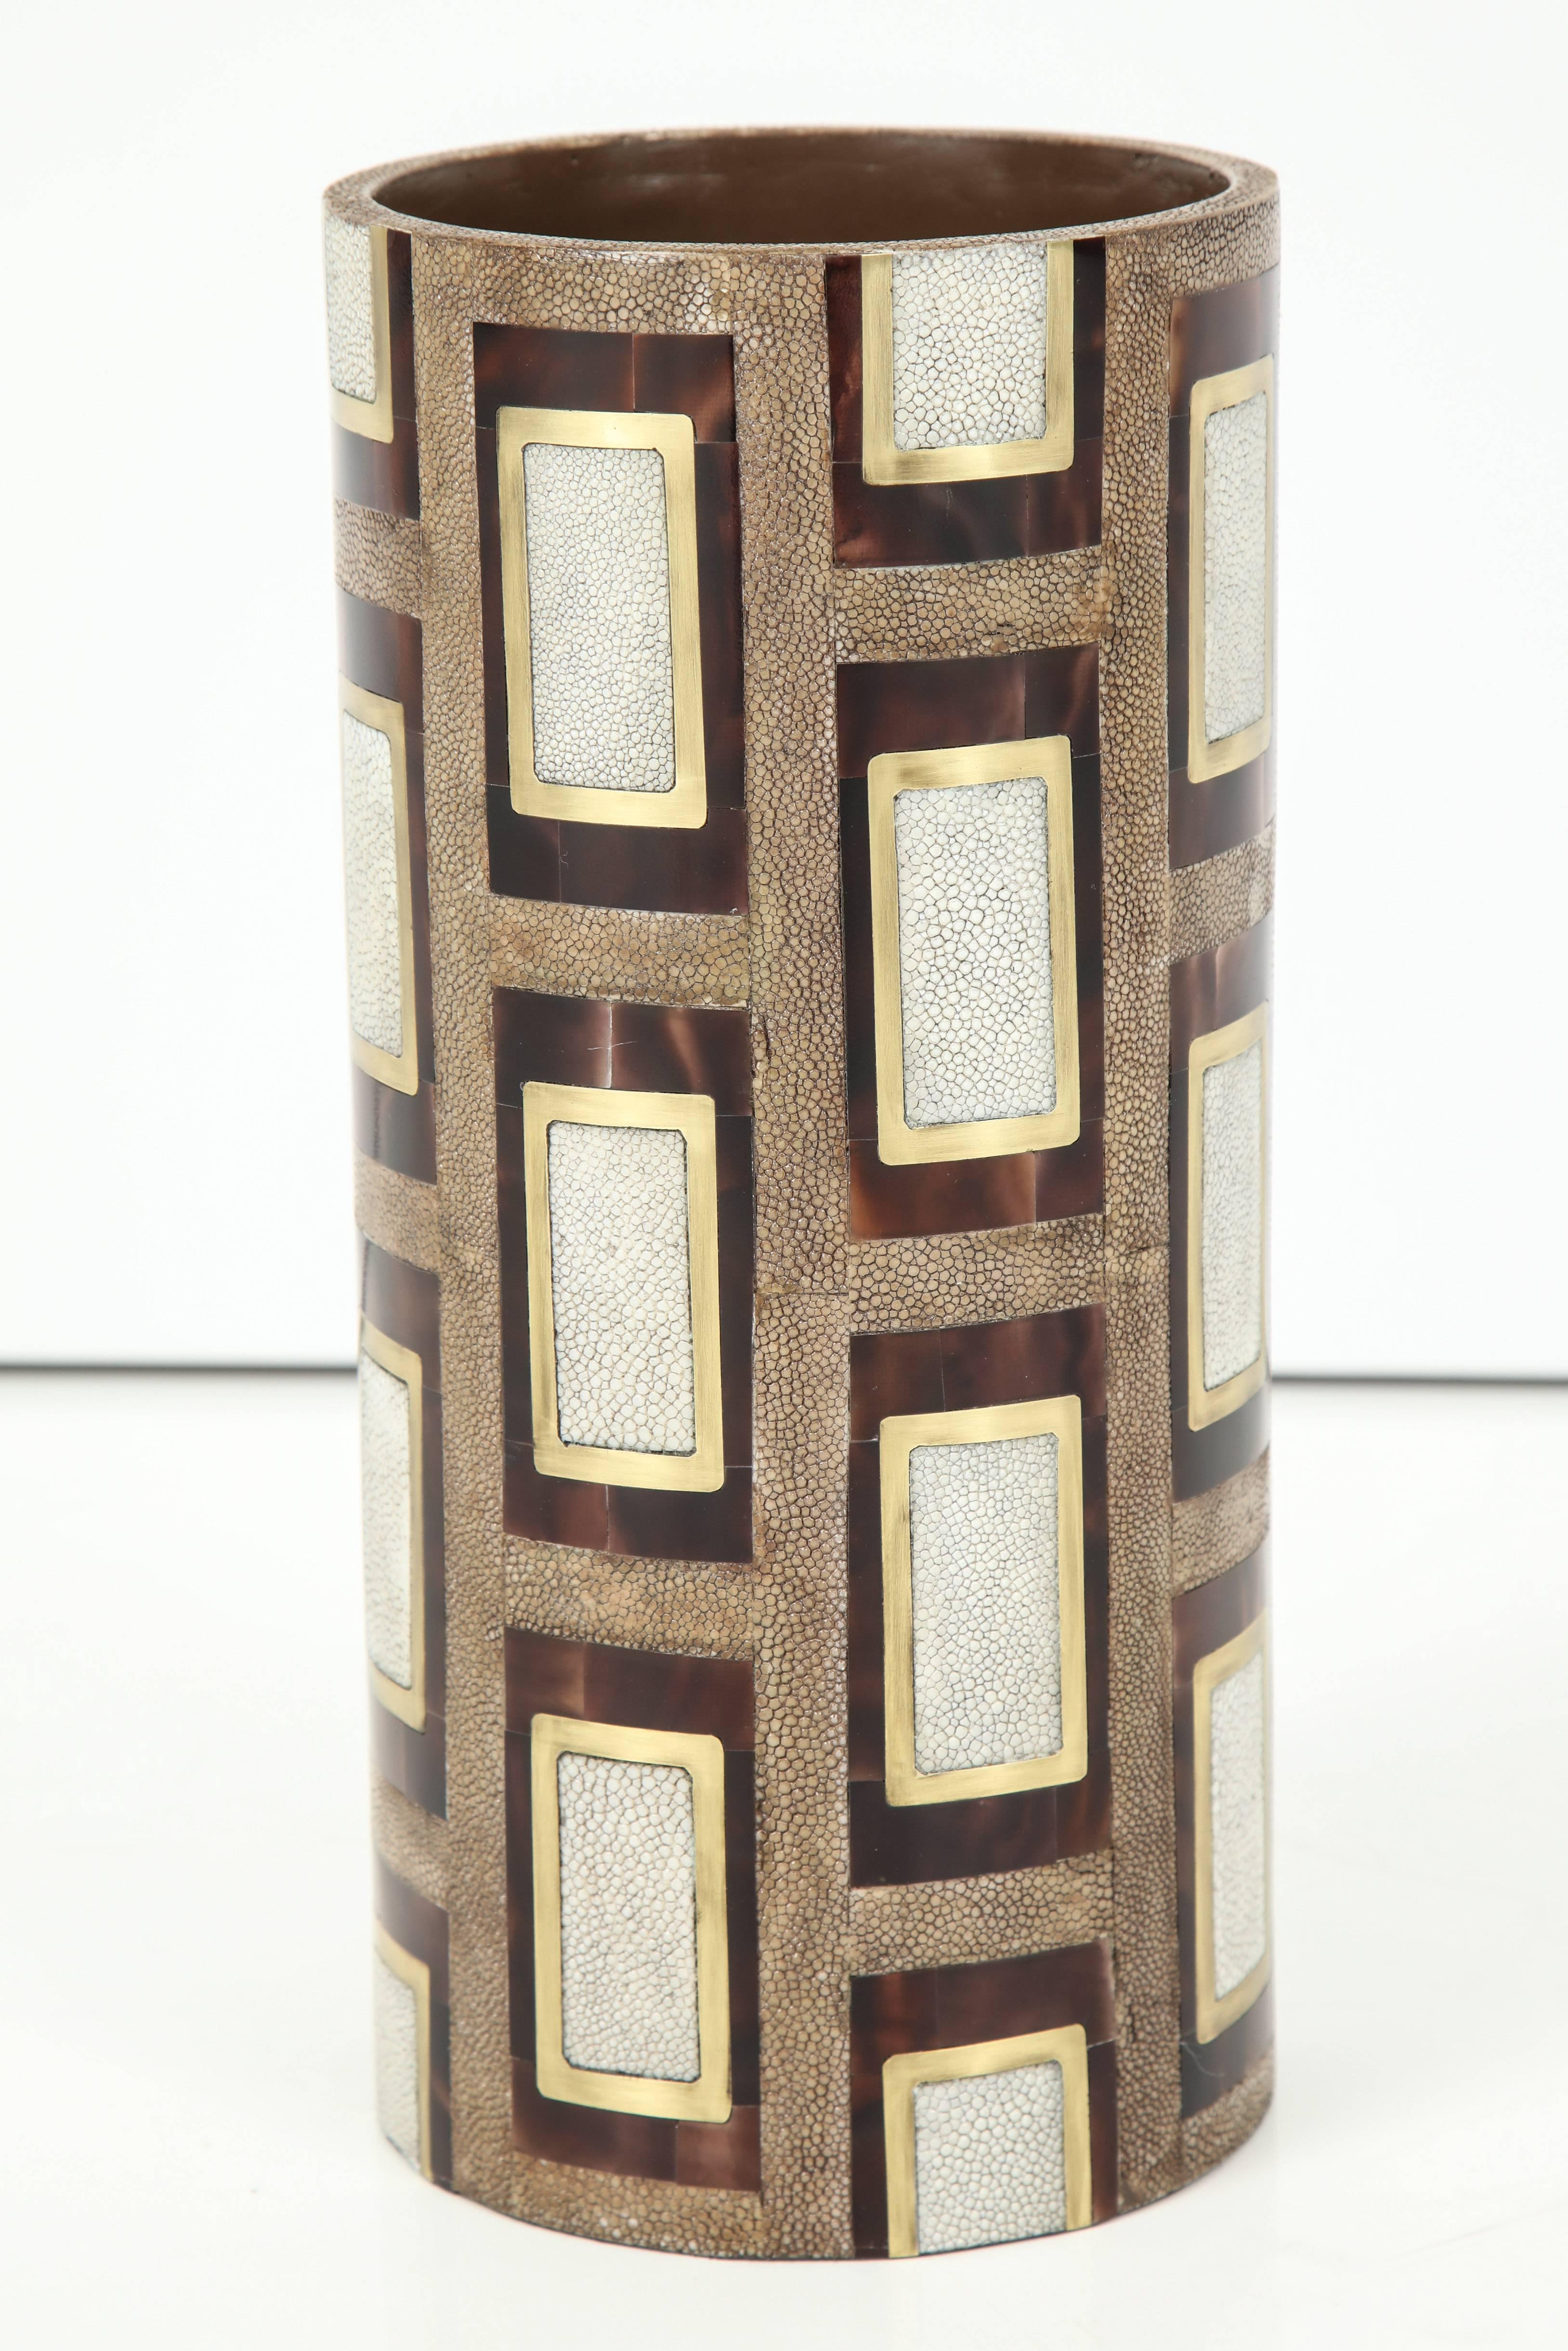 Shagreen vase with two color shagreen, cream and taupe with bronze and palm wood details. France.